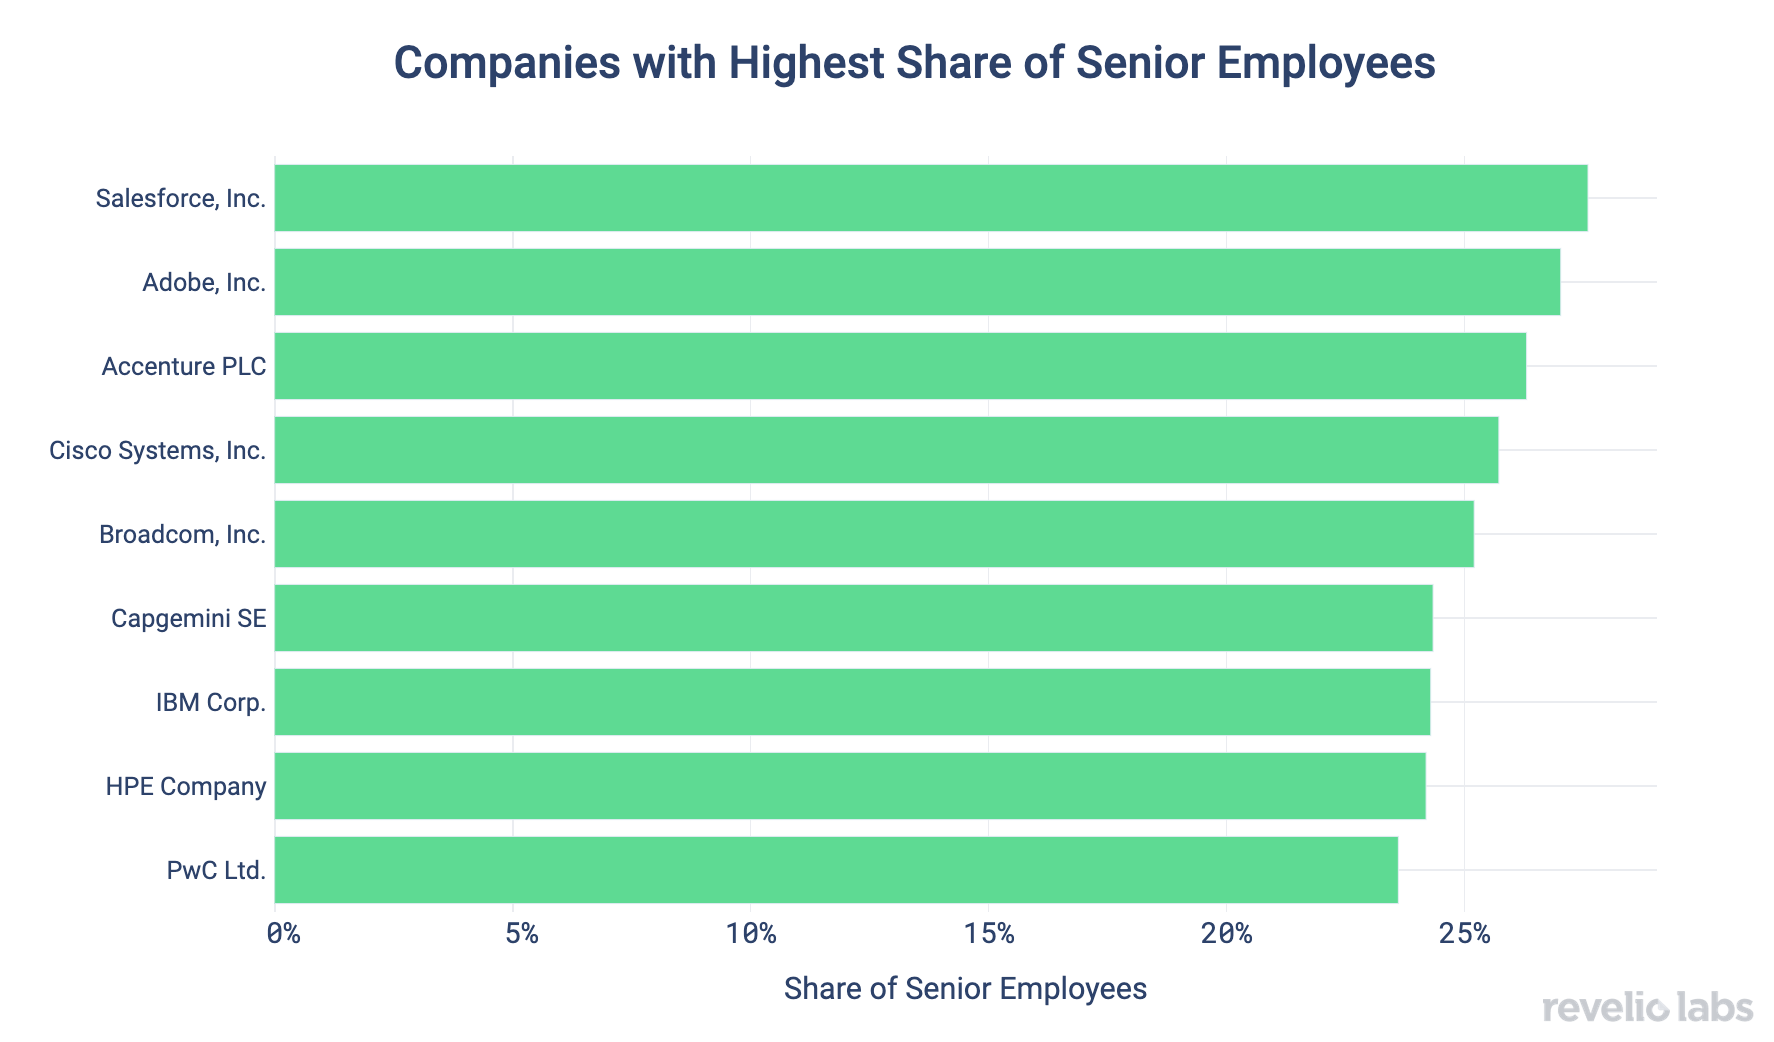 Companies with highest share of senior employees